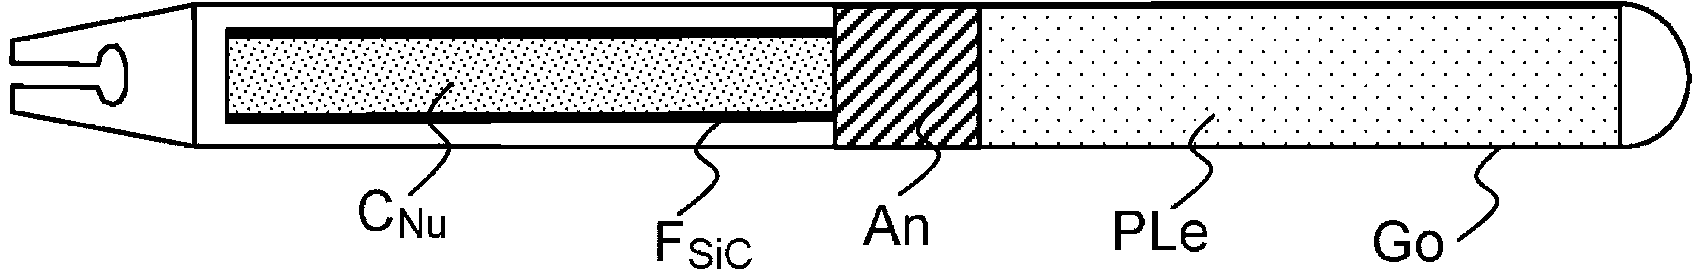 Metal nuclear-fuel pin including a shell having threads or fibers made of silicon carbide (SiC)